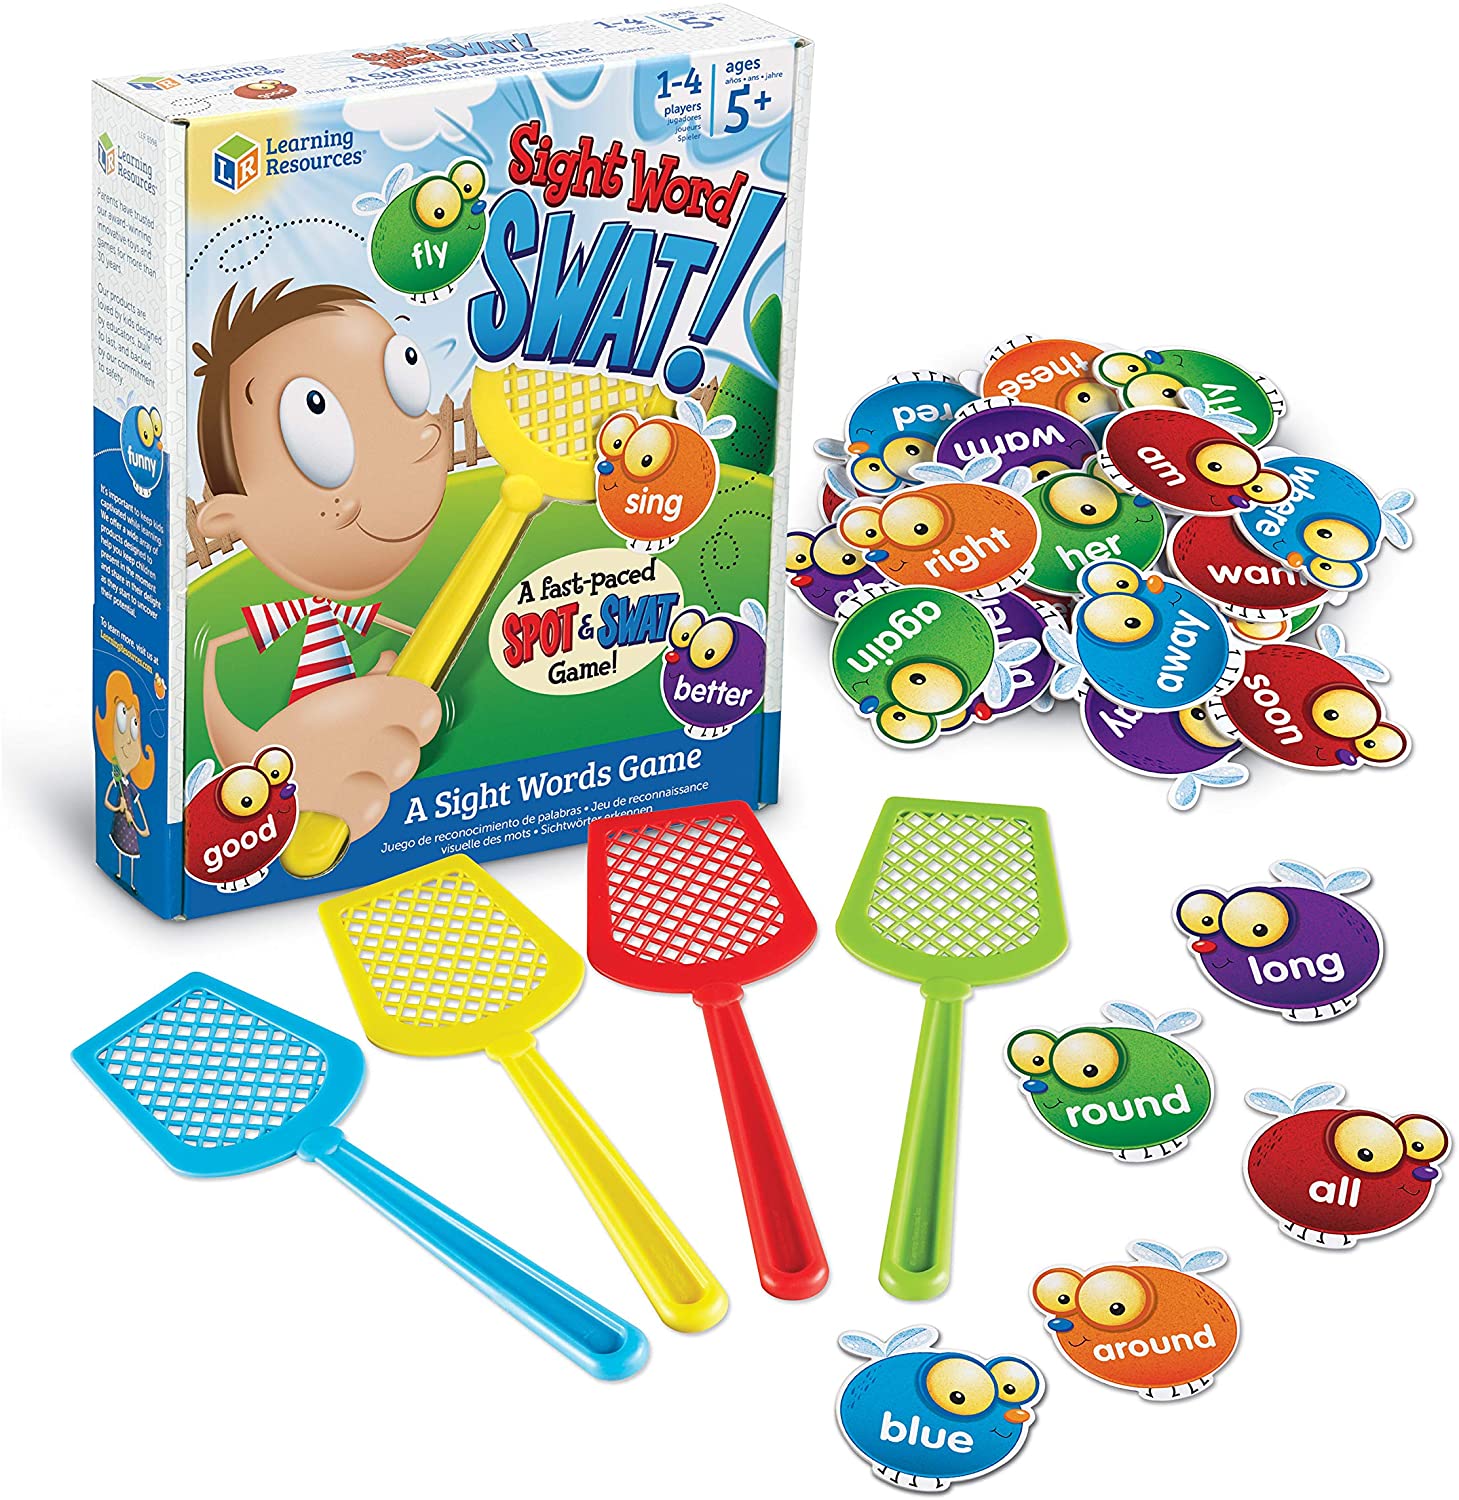 Learning Resources Sight Word Swat Game Early Reading Classroom Supplies